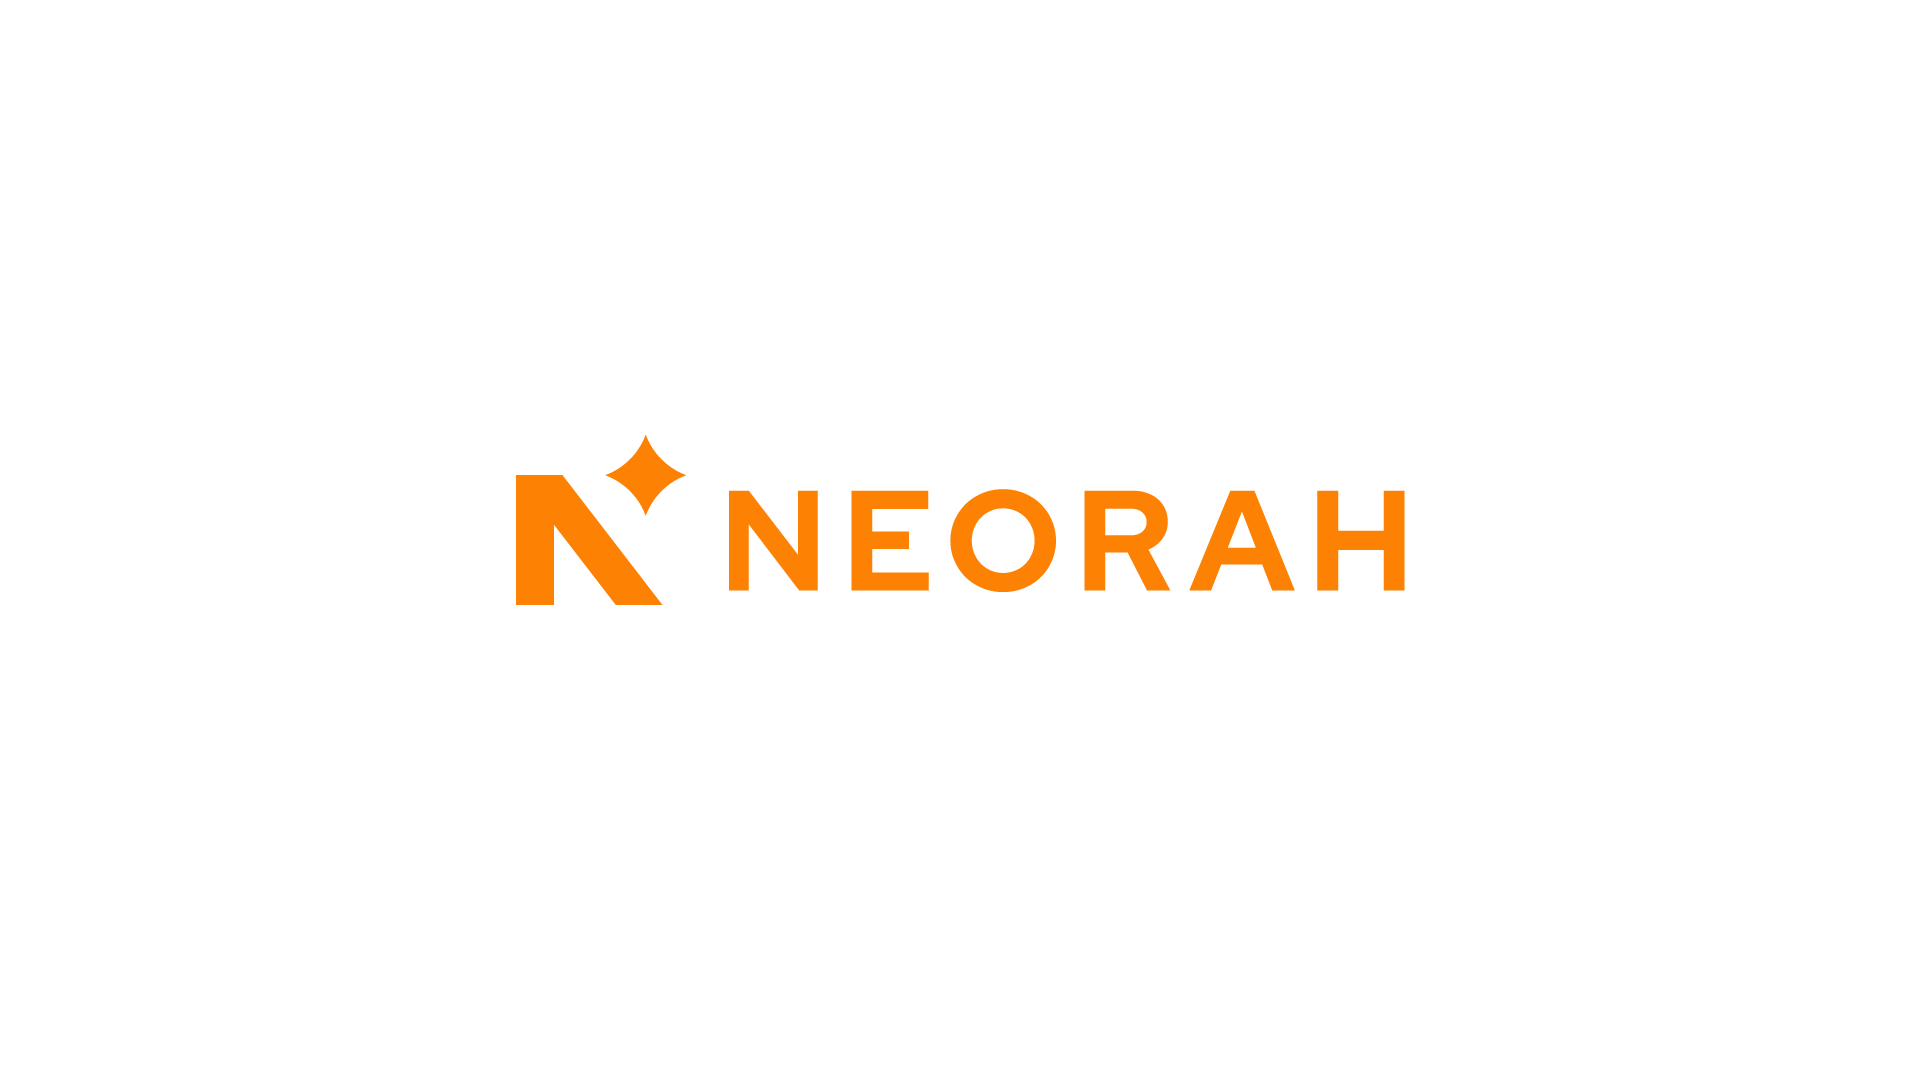 NEORAH - Stationery Manufacturer logo, letter 'N' combined with a star, symbolizing quality and excellence in stationery